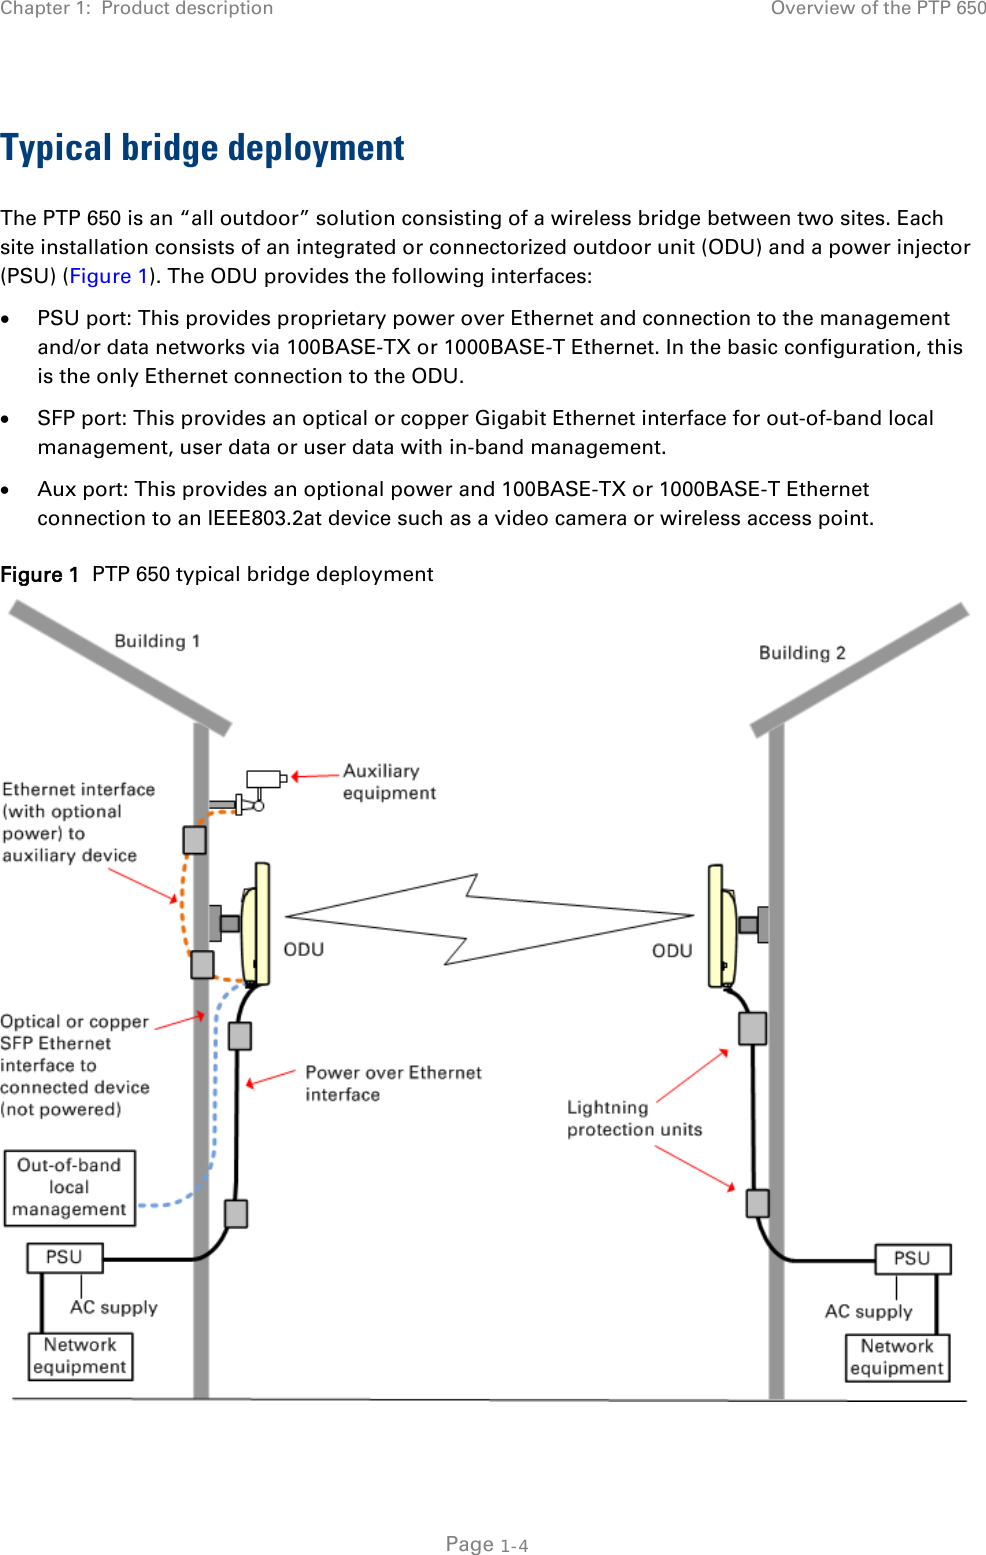 Chapter 1:  Product description Overview of the PTP 650  Typical bridge deployment The PTP 650 is an “all outdoor” solution consisting of a wireless bridge between two sites. Each site installation consists of an integrated or connectorized outdoor unit (ODU) and a power injector (PSU) (Figure 1). The ODU provides the following interfaces: • PSU port: This provides proprietary power over Ethernet and connection to the management and/or data networks via 100BASE-TX or 1000BASE-T Ethernet. In the basic configuration, this is the only Ethernet connection to the ODU. • SFP port: This provides an optical or copper Gigabit Ethernet interface for out-of-band local management, user data or user data with in-band management. • Aux port: This provides an optional power and 100BASE-TX or 1000BASE-T Ethernet connection to an IEEE803.2at device such as a video camera or wireless access point. Figure 1  PTP 650 typical bridge deployment   Page 1-4 